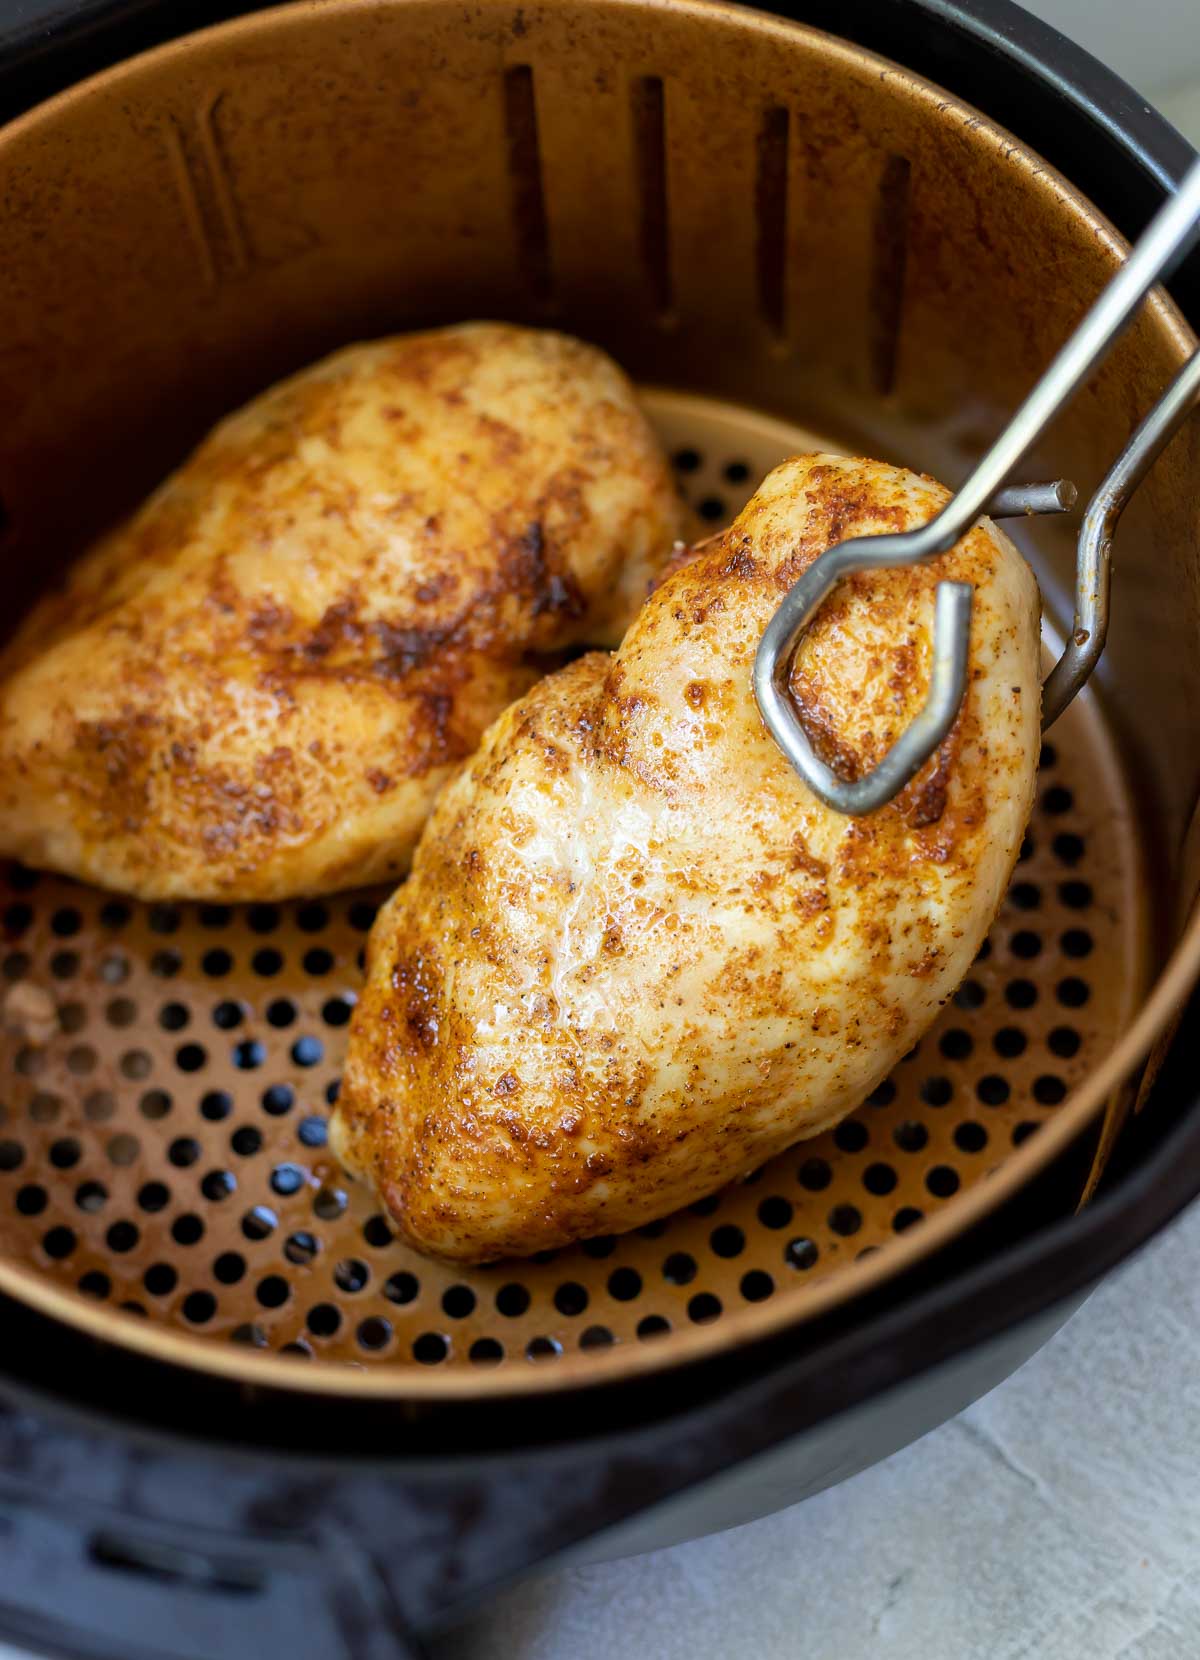 Air Fryer Chicken Breast - Dinner at the Zoo